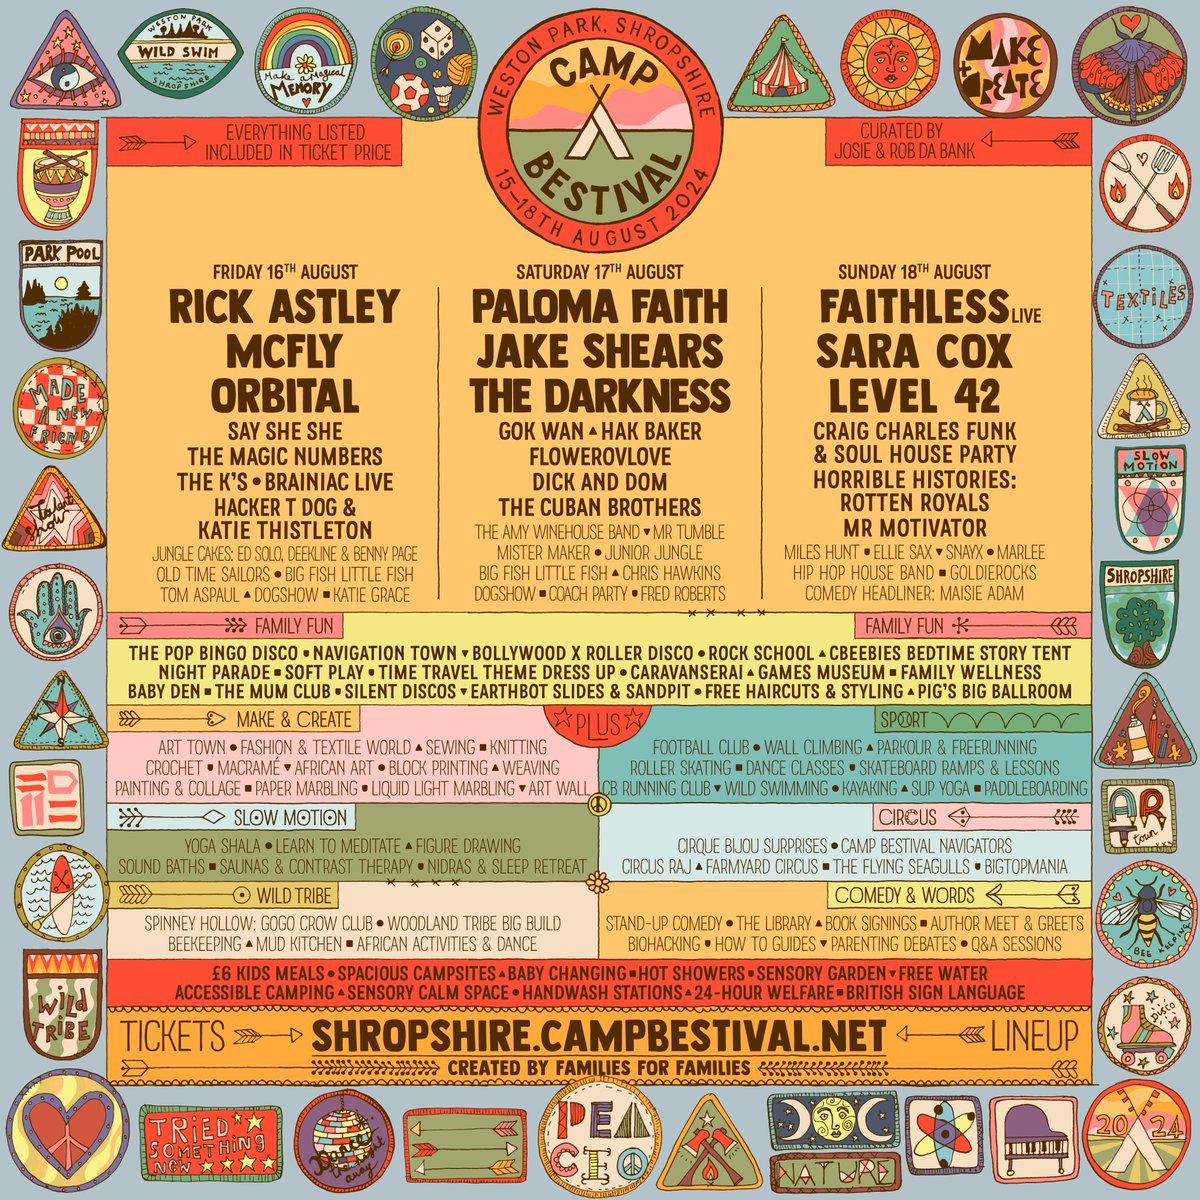 Camp Bestival Shropshire Day Tickets are now on sale 🙌🏻Don't miss out 💥 shropshire.campbestival.net/day-tickets/